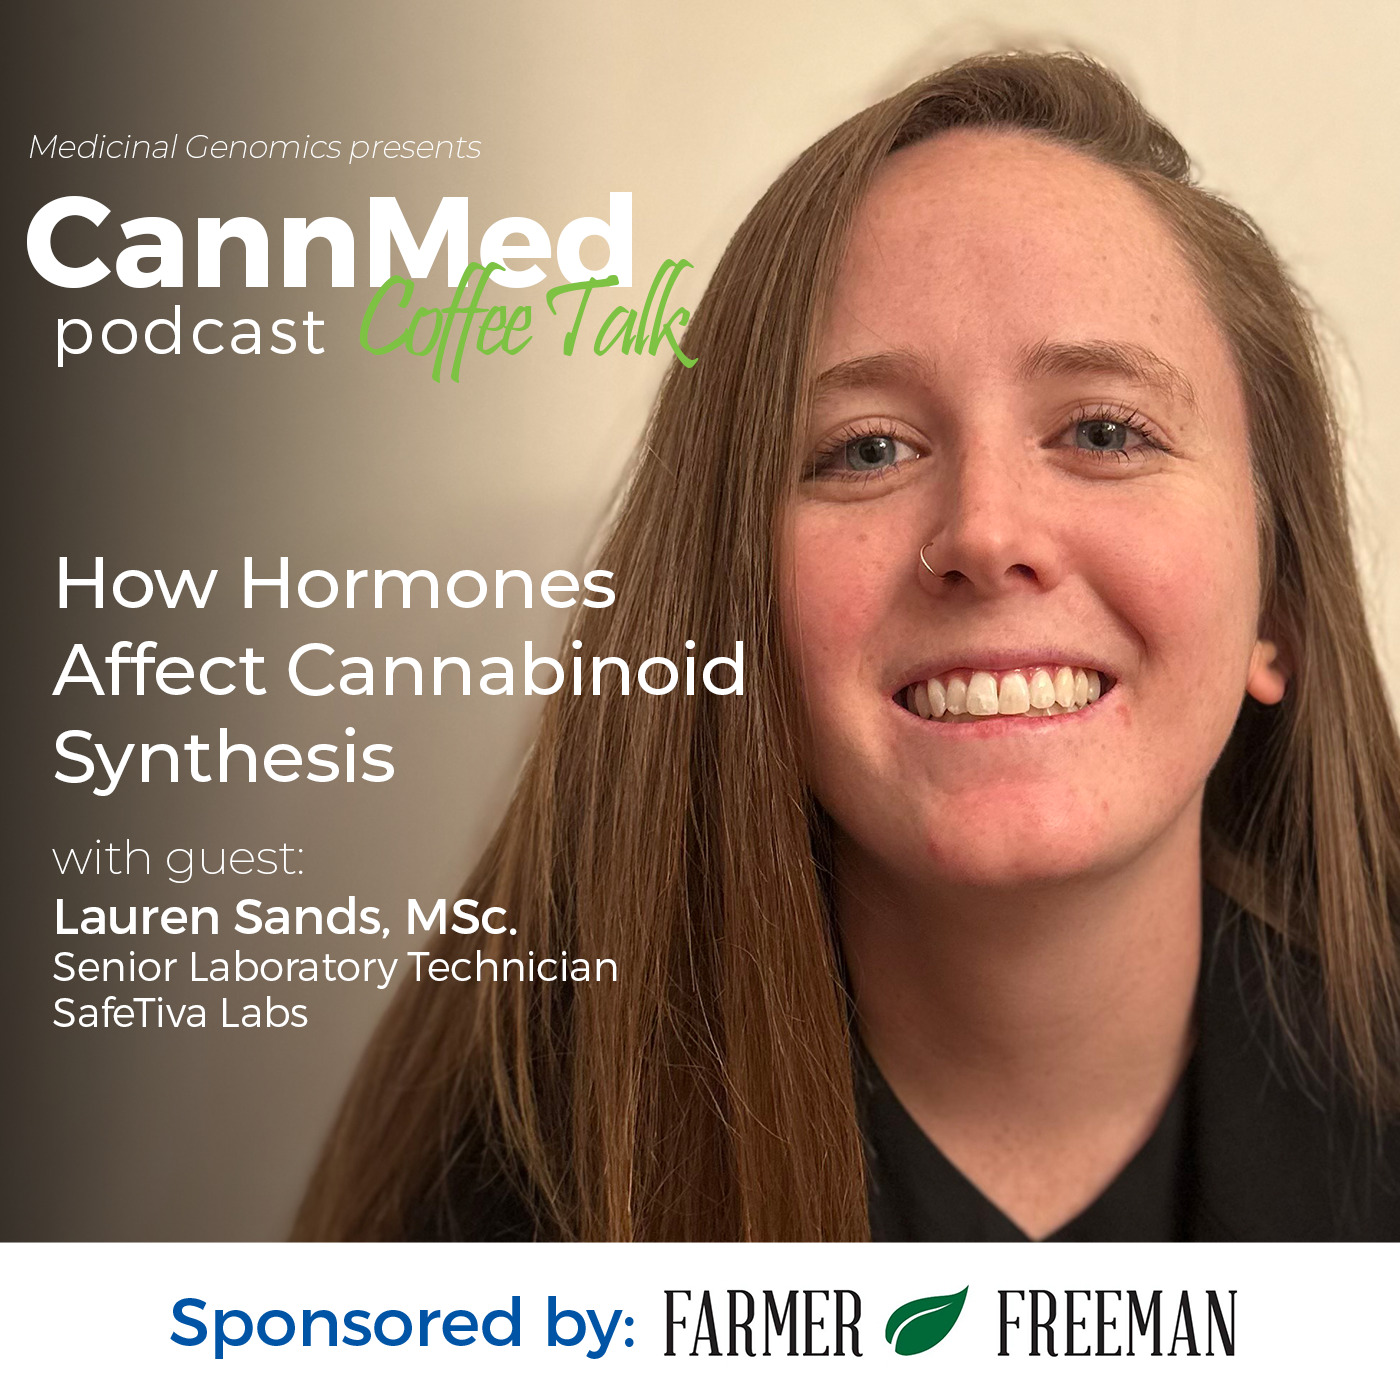 Featured image for “How Hormones Affect Cannabinoid Synthesis with Lauren Sands, MSc.”